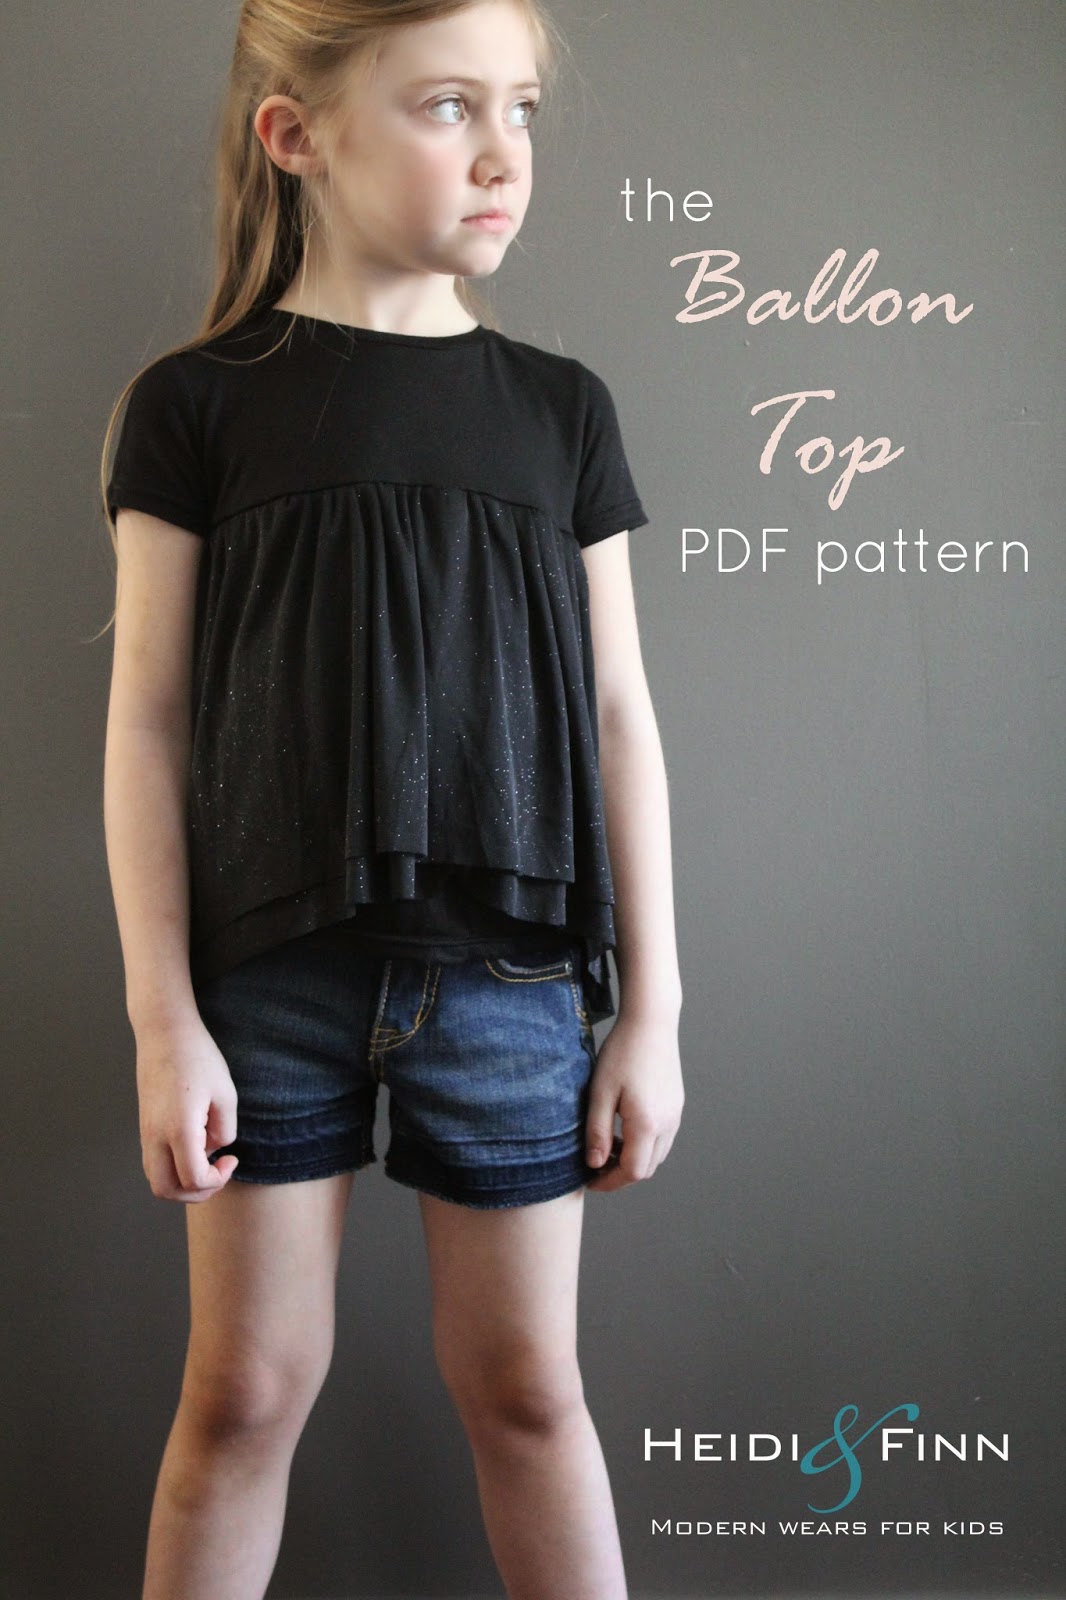 https://www.etsy.com/listing/186315257/new-ballon-top-pattern-and-tutorial-12m?